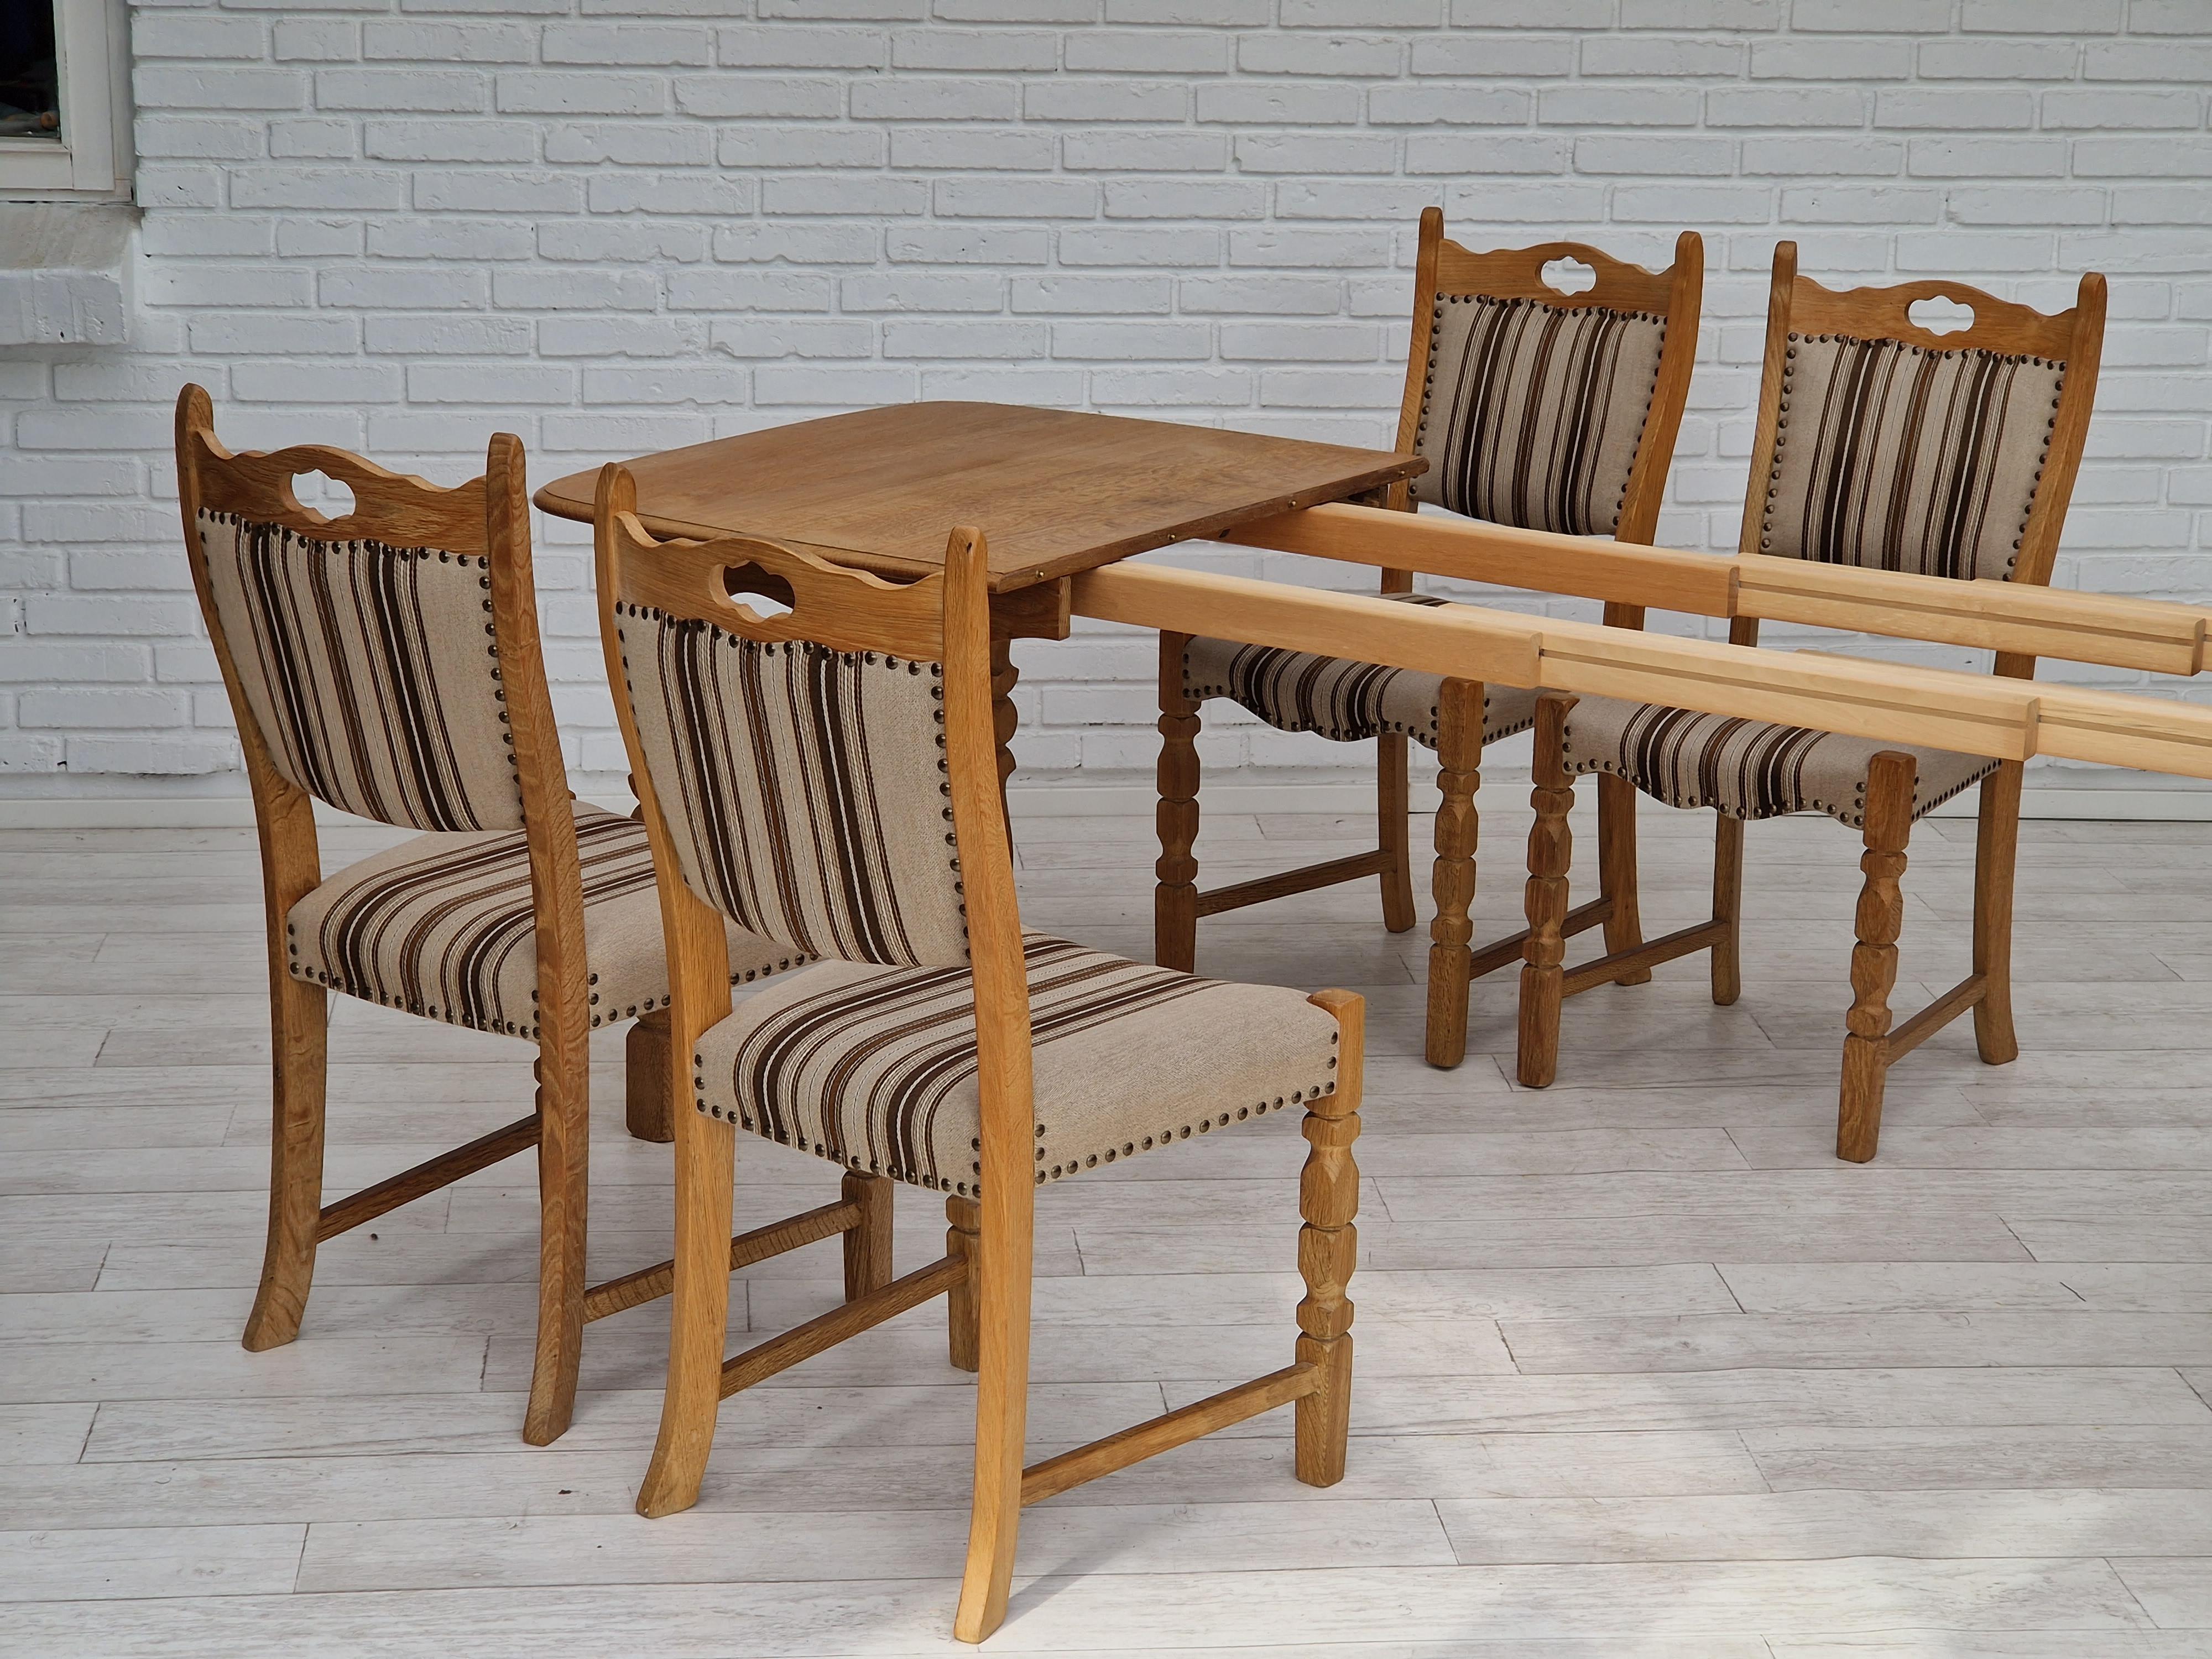 1970s, Danish Design, Dinning Set of Table and Four Chairs, Oak Wood, Wool For Sale 4